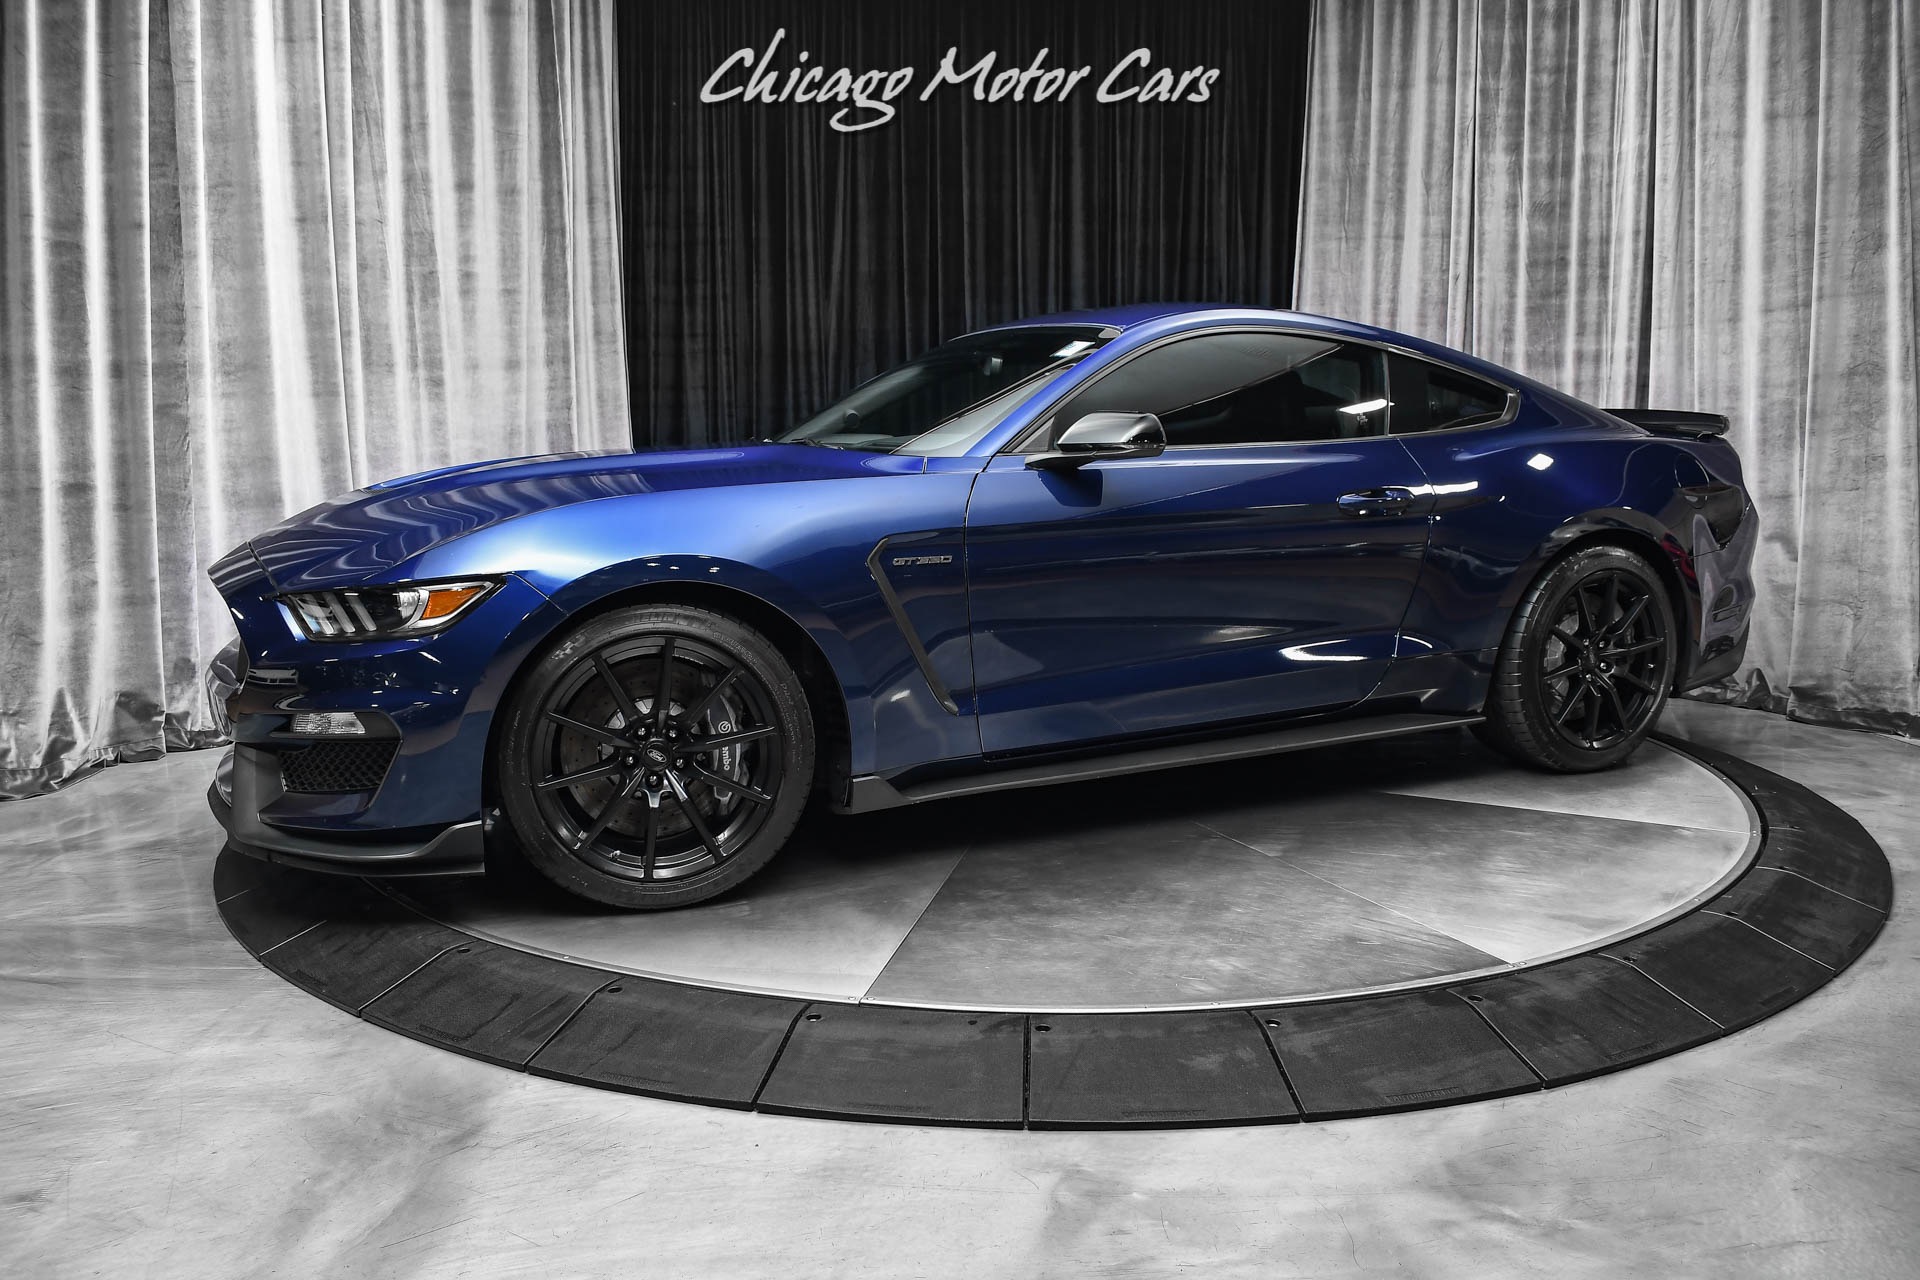 Used-2018-Ford-Mustang-Shelby-GT350-Awesome-Color-Combo-6-Speed-Manual-Low-Miles